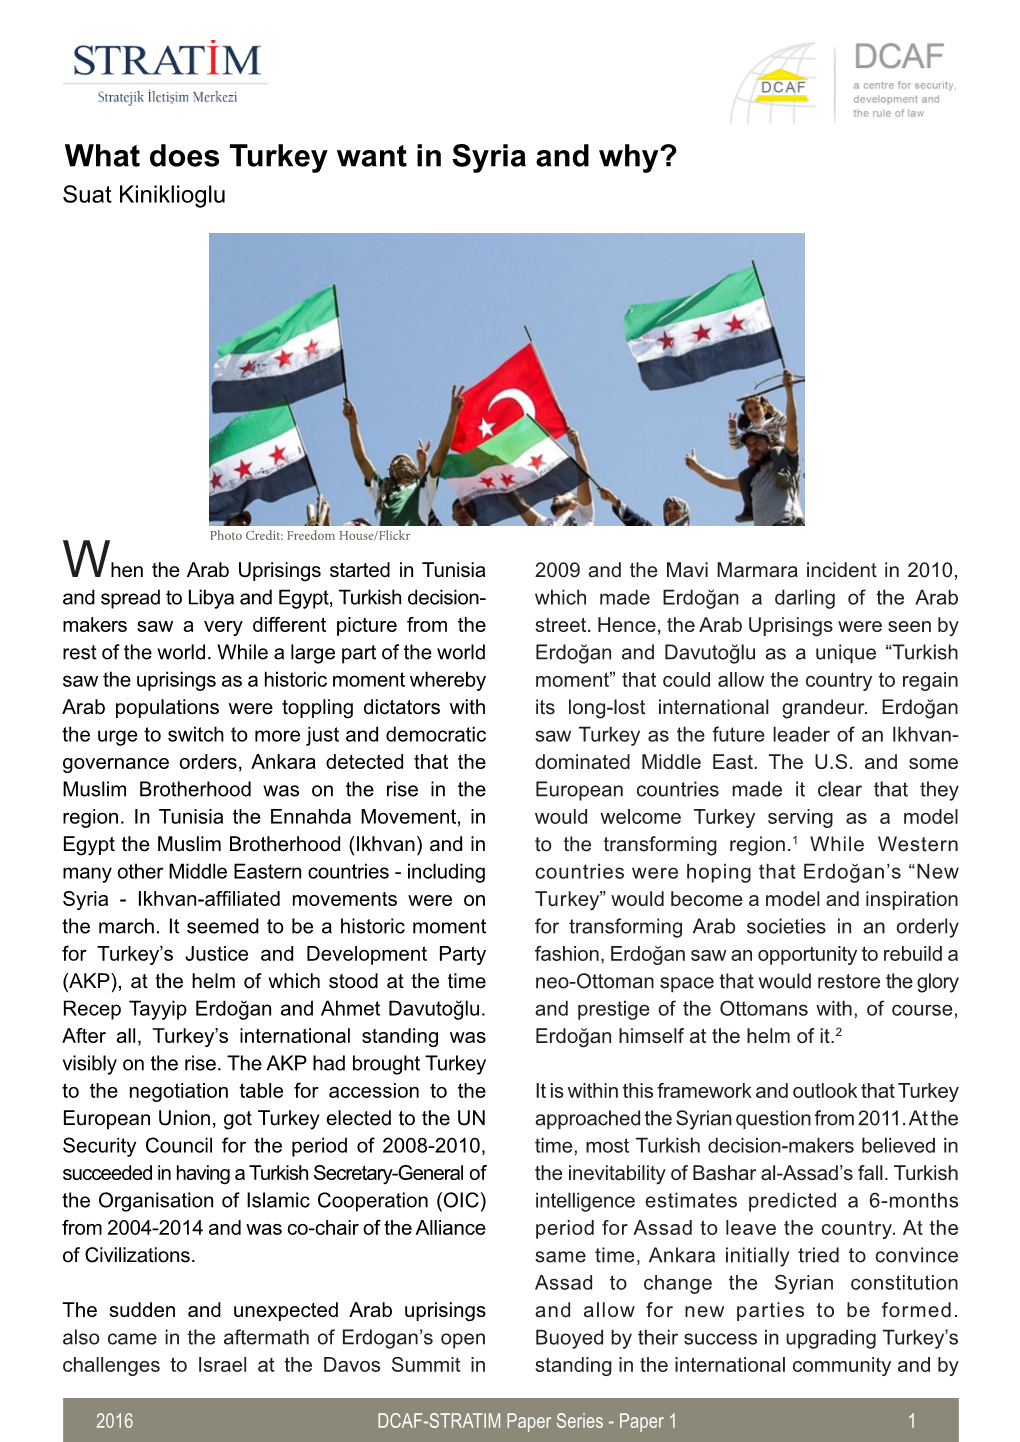 What Does Turkey Want in Syria and Why? Suat Kiniklioglu